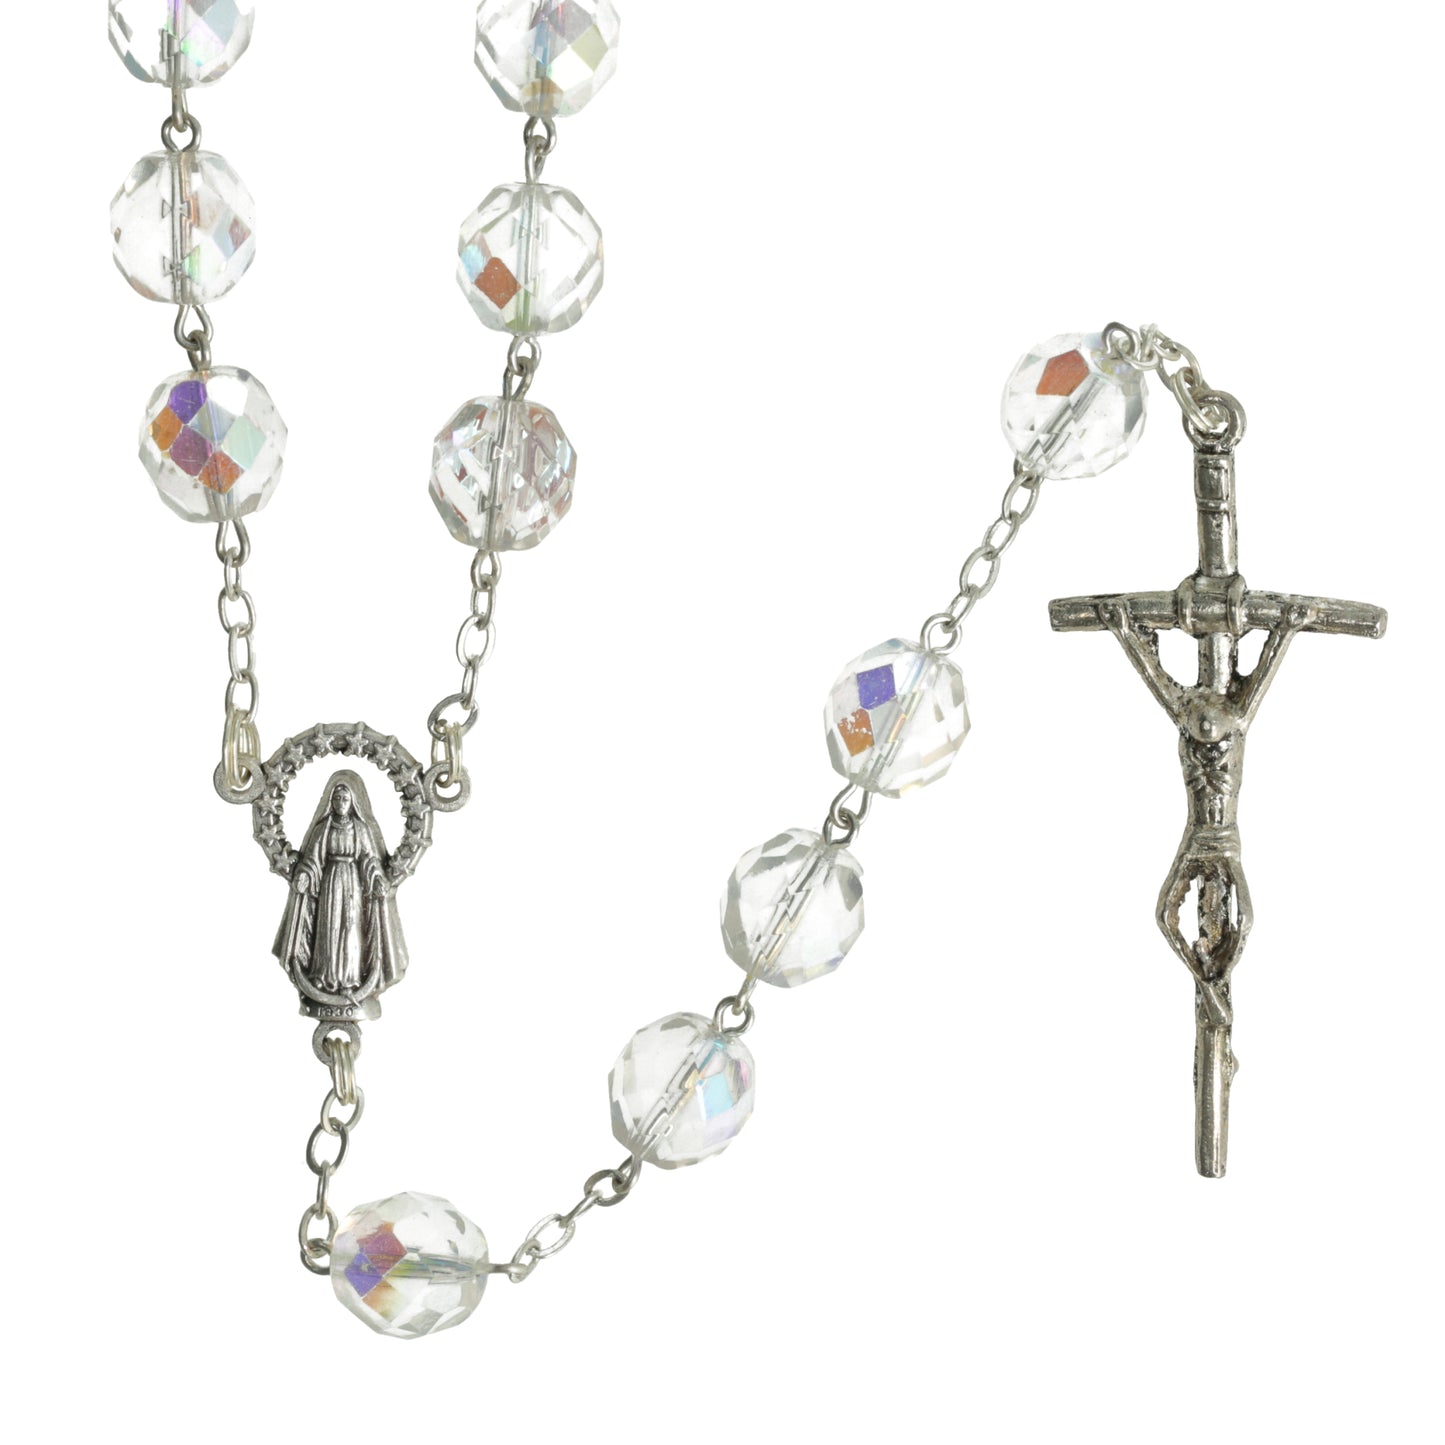 Rosary Crystal Calotas Communion Weddings Brides. Souvenirs from Italy